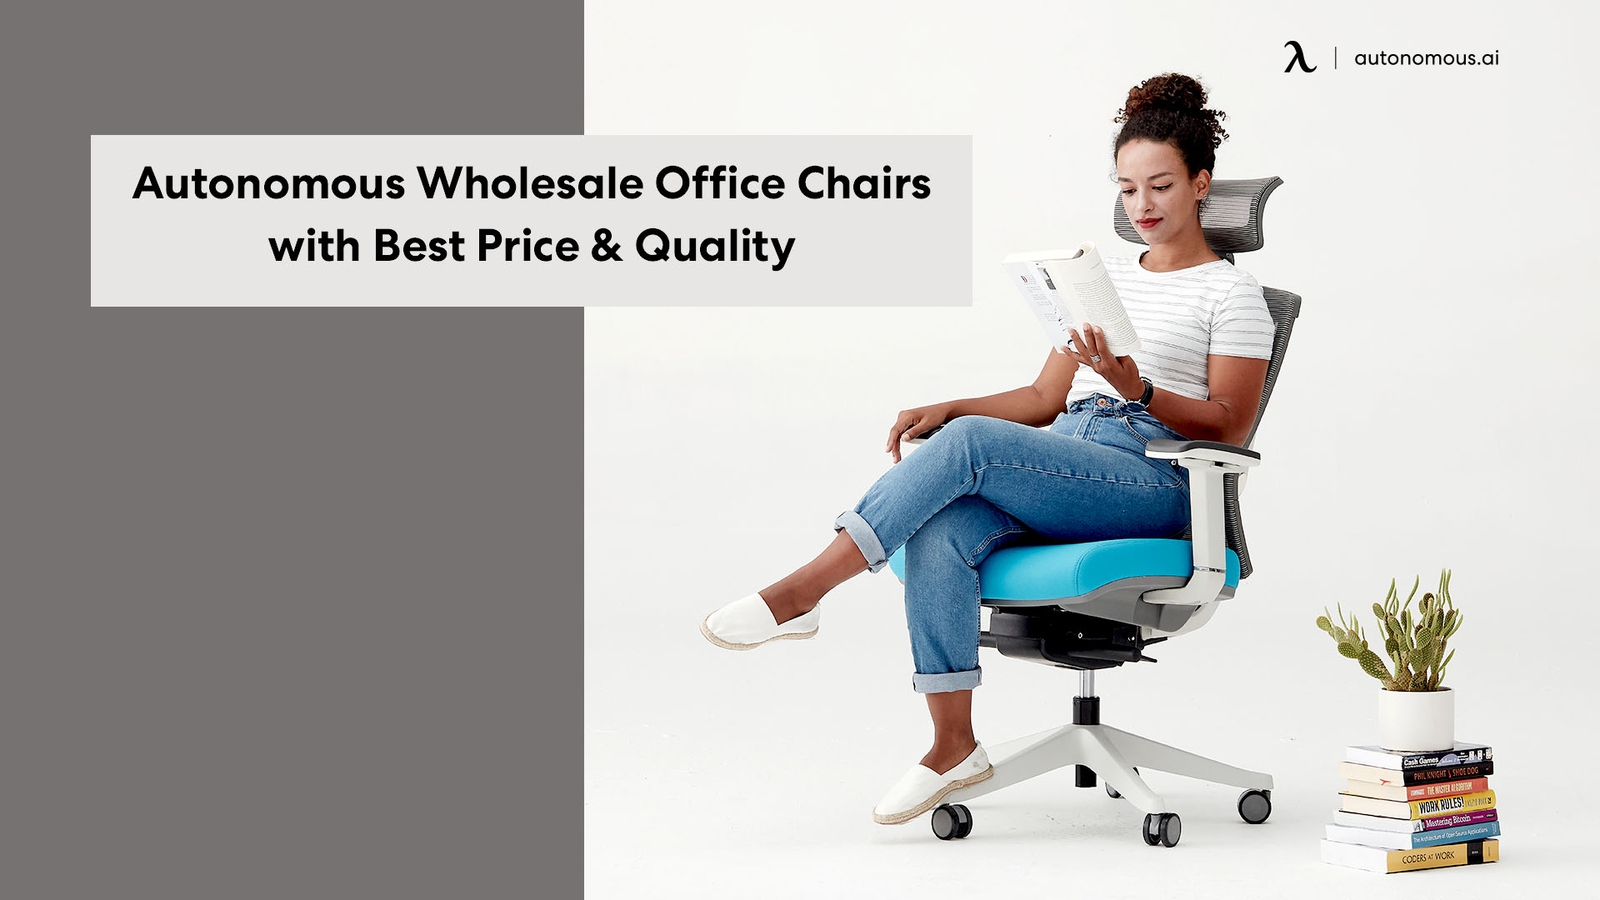 Autonomous Wholesale Office Chairs with Best Price & Quality